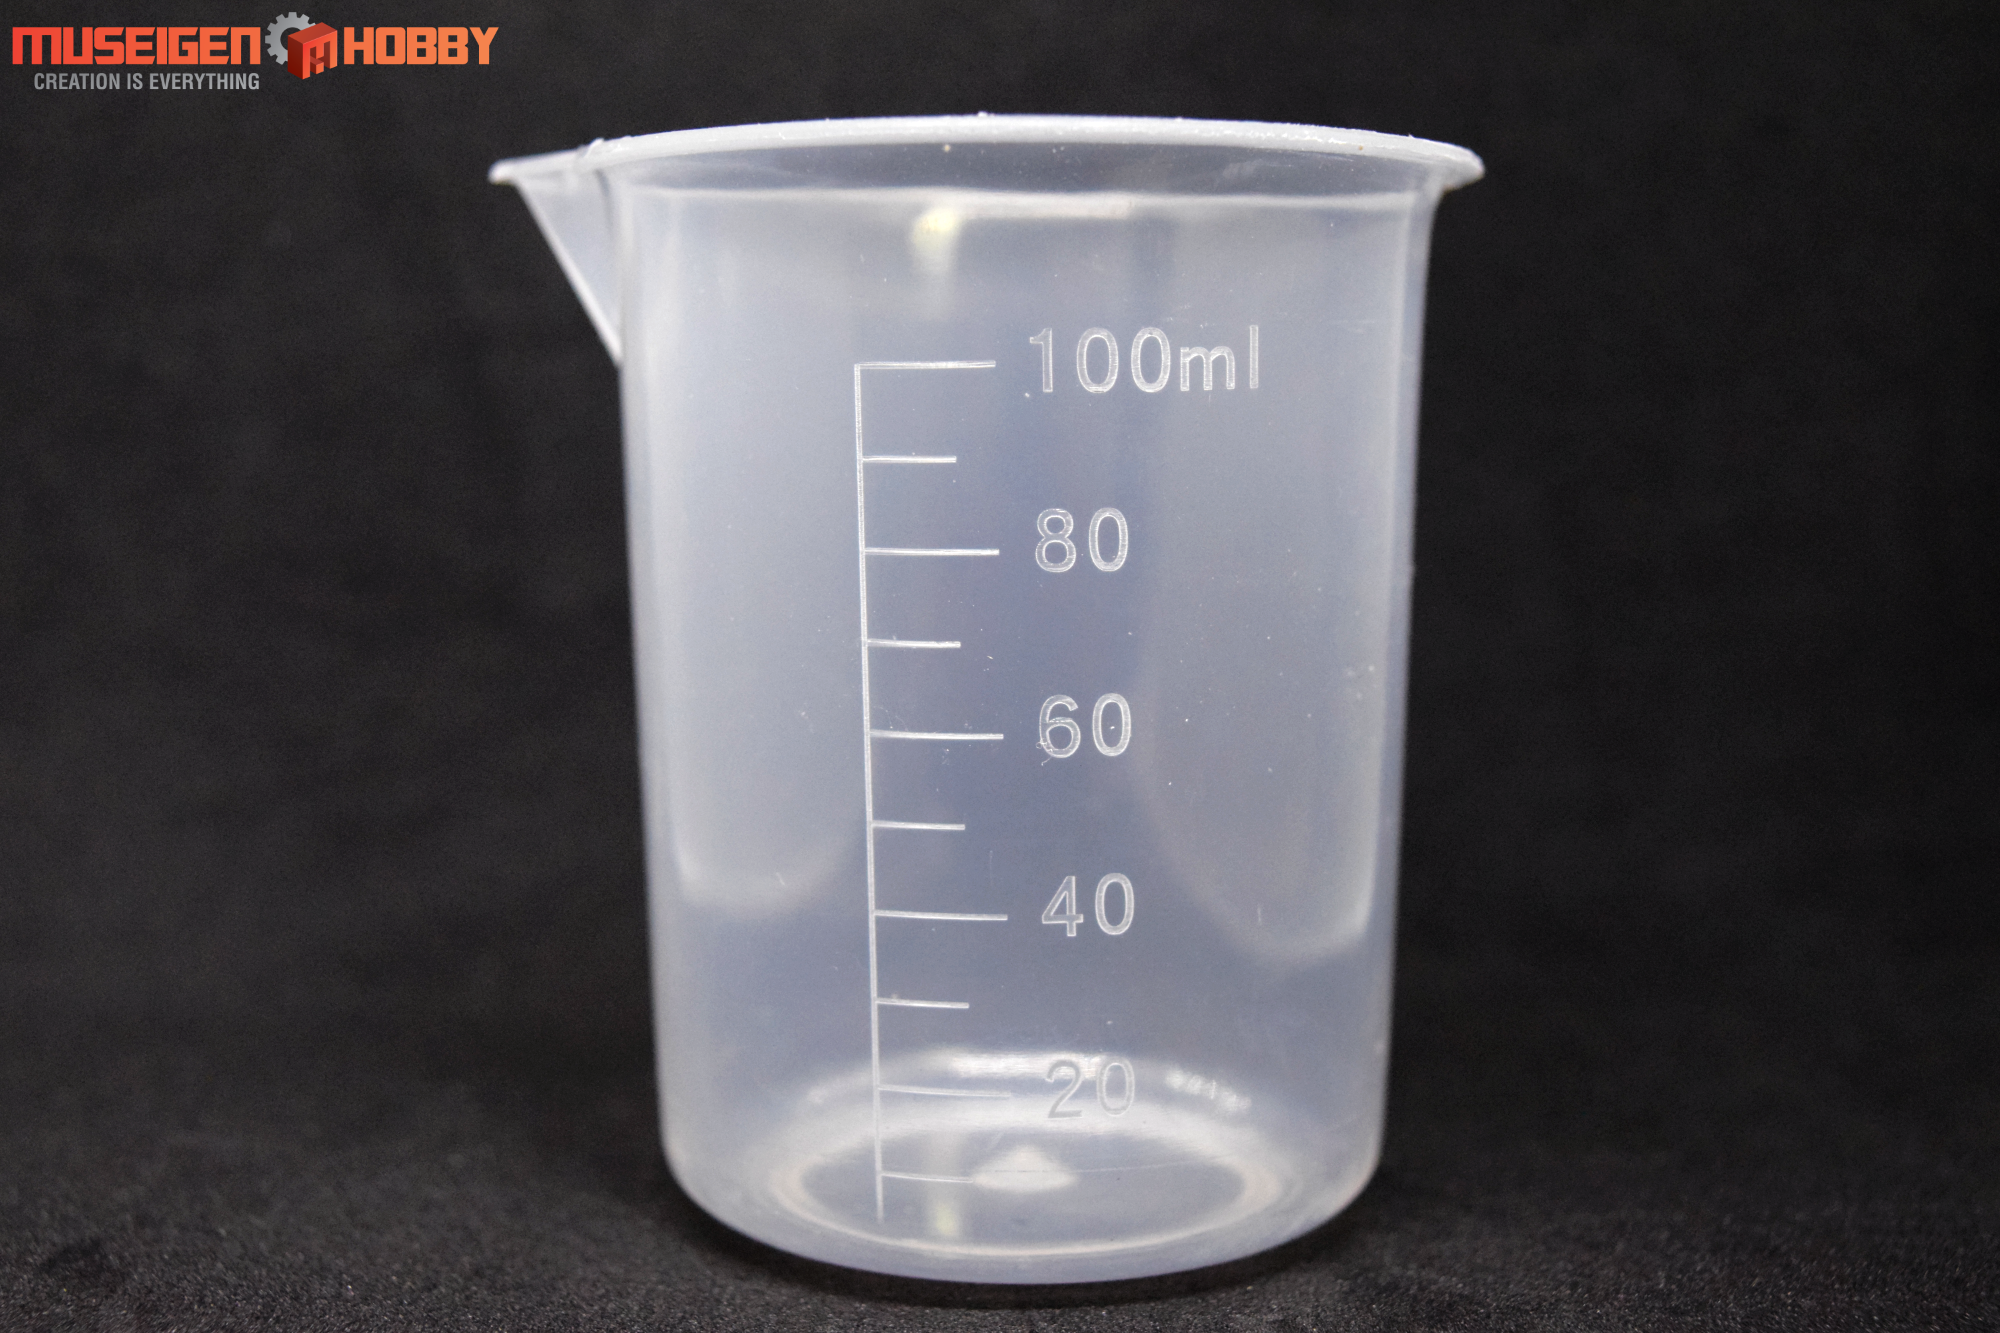  Measuring Cups for Automotive | Transparent - 100ml, 1000ml, Chemical Resistant, High Accuracy